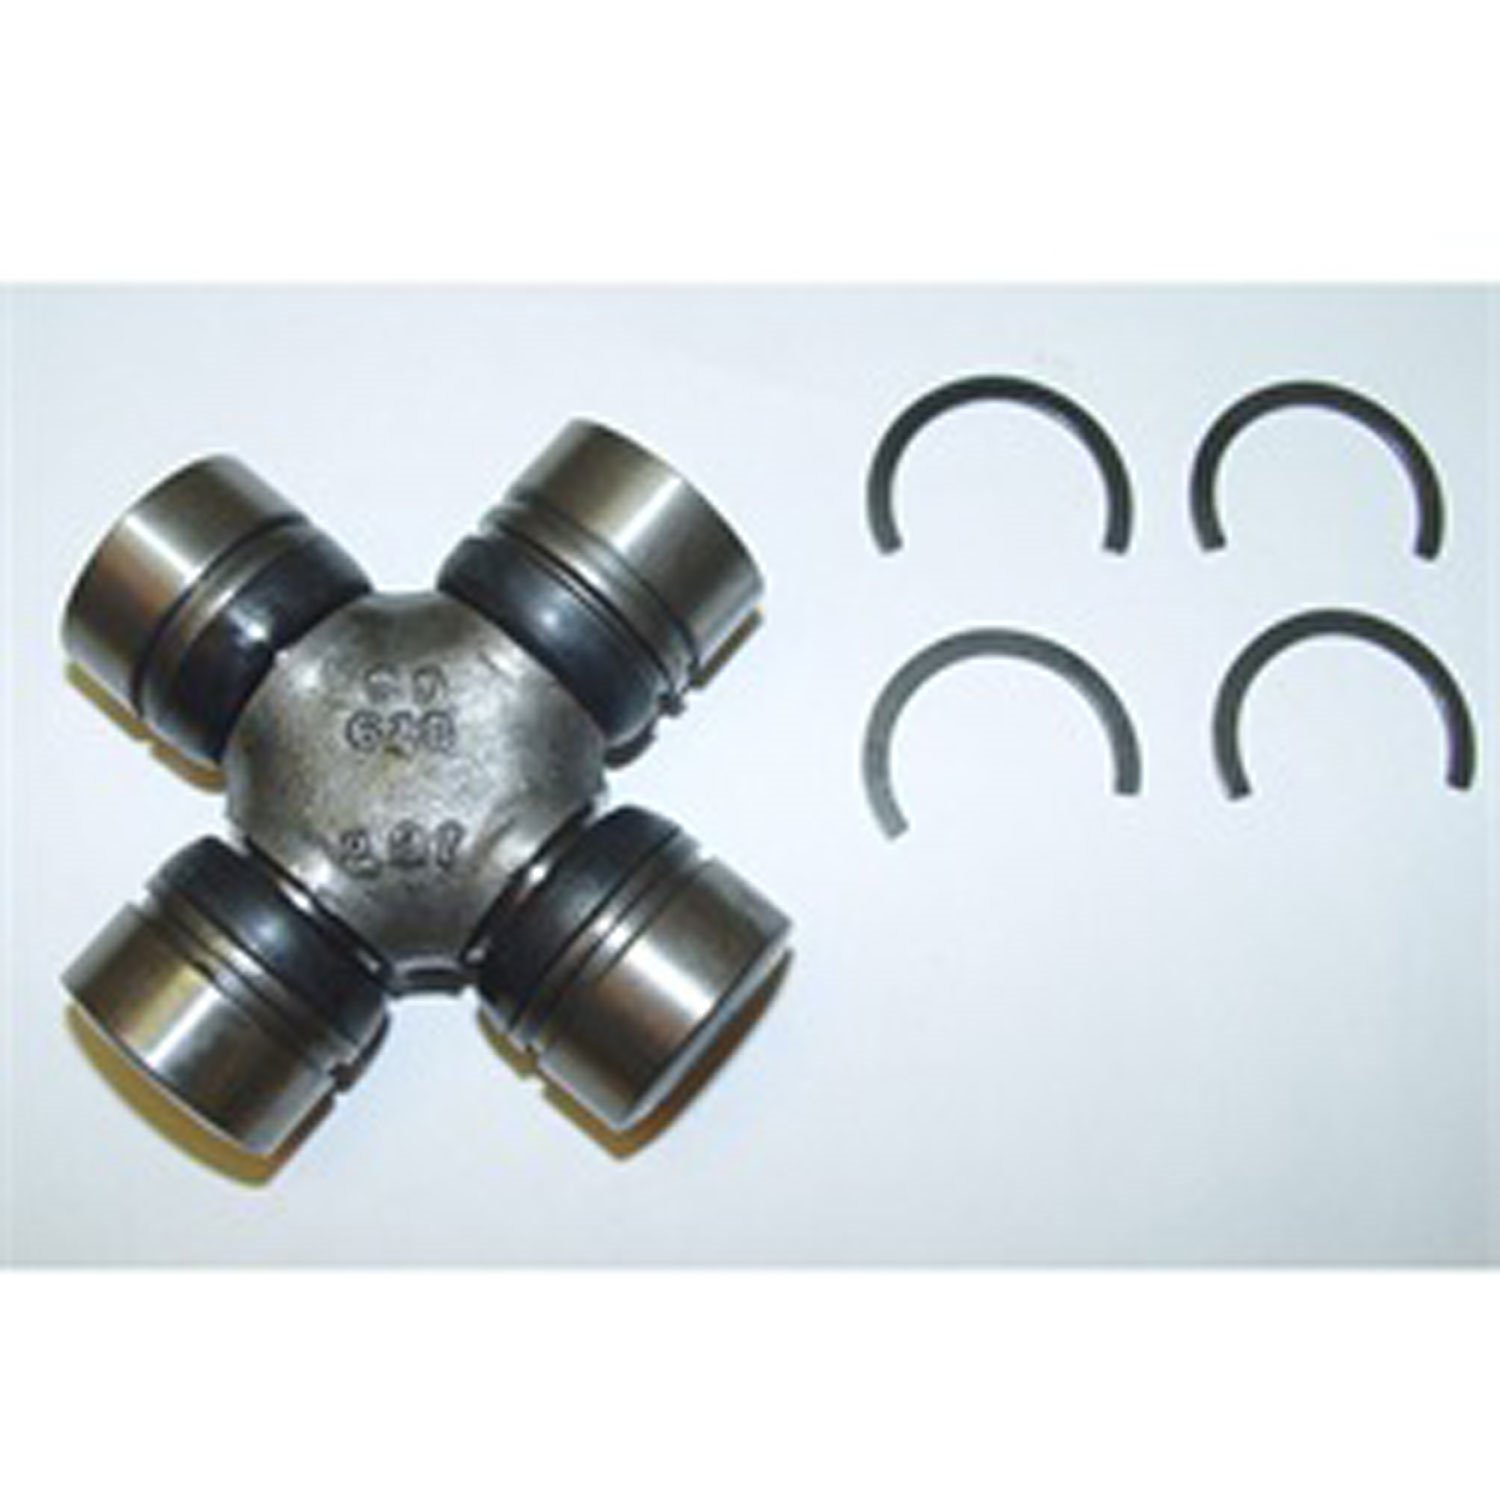 Stock replacement greasable U-Joint from Omix-ADA for Dana 30 left or right side front axles.